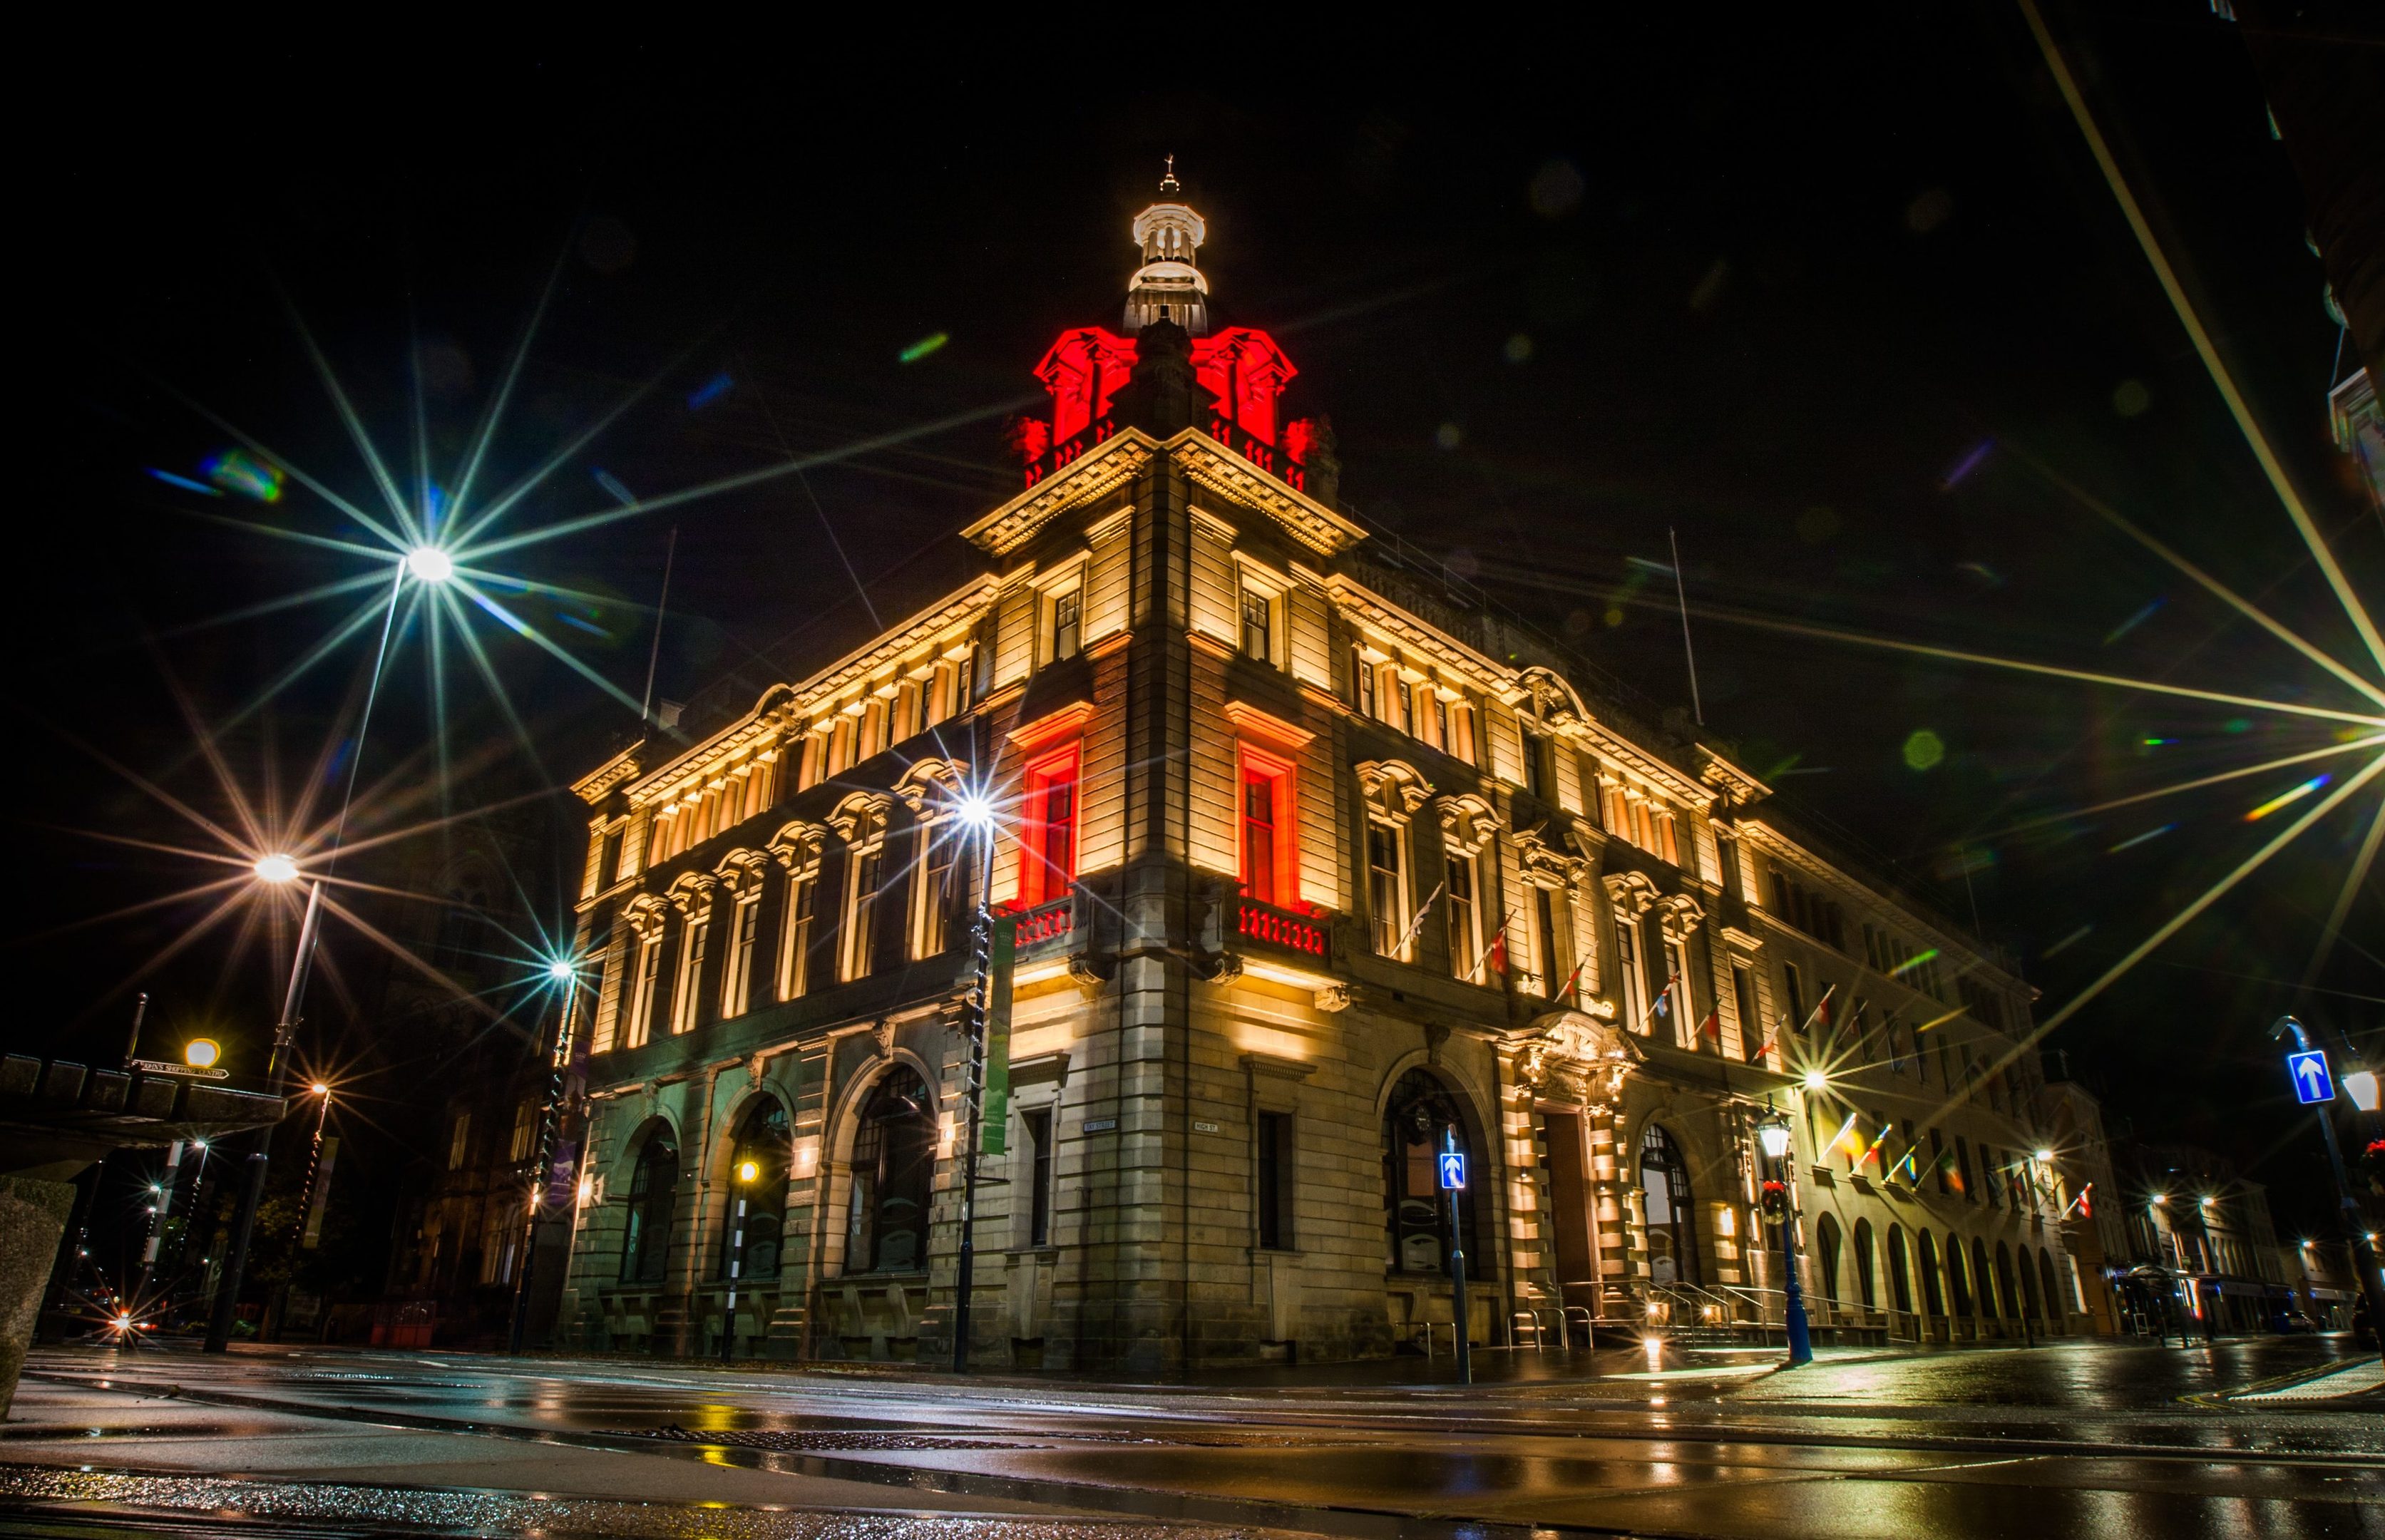 Perth and Kinross Council High Street headquarters lit up.